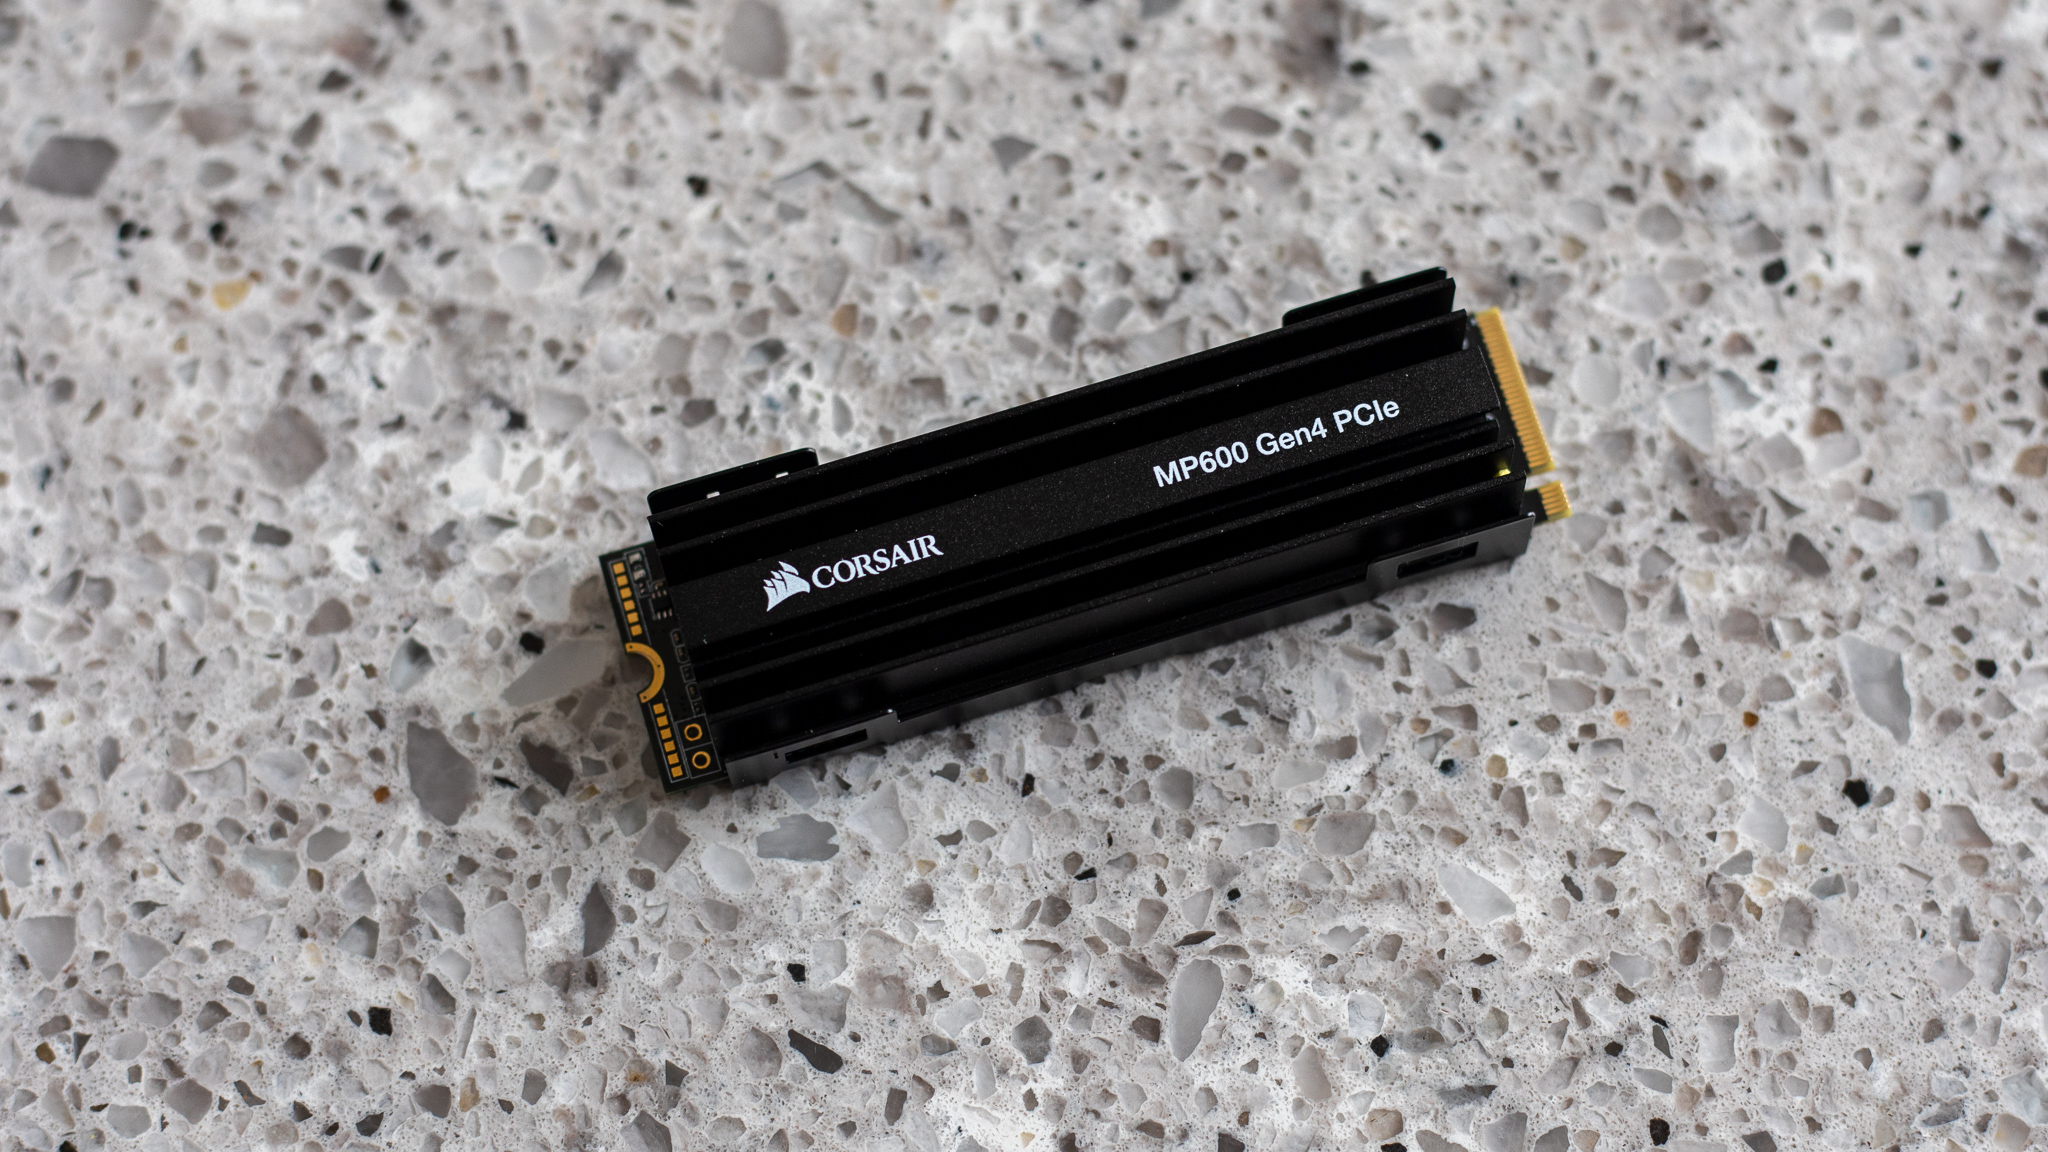 Corsair MP600 Gen 4 NVME SSD Review (1TB) - 5GB/s and 700+K IOPS